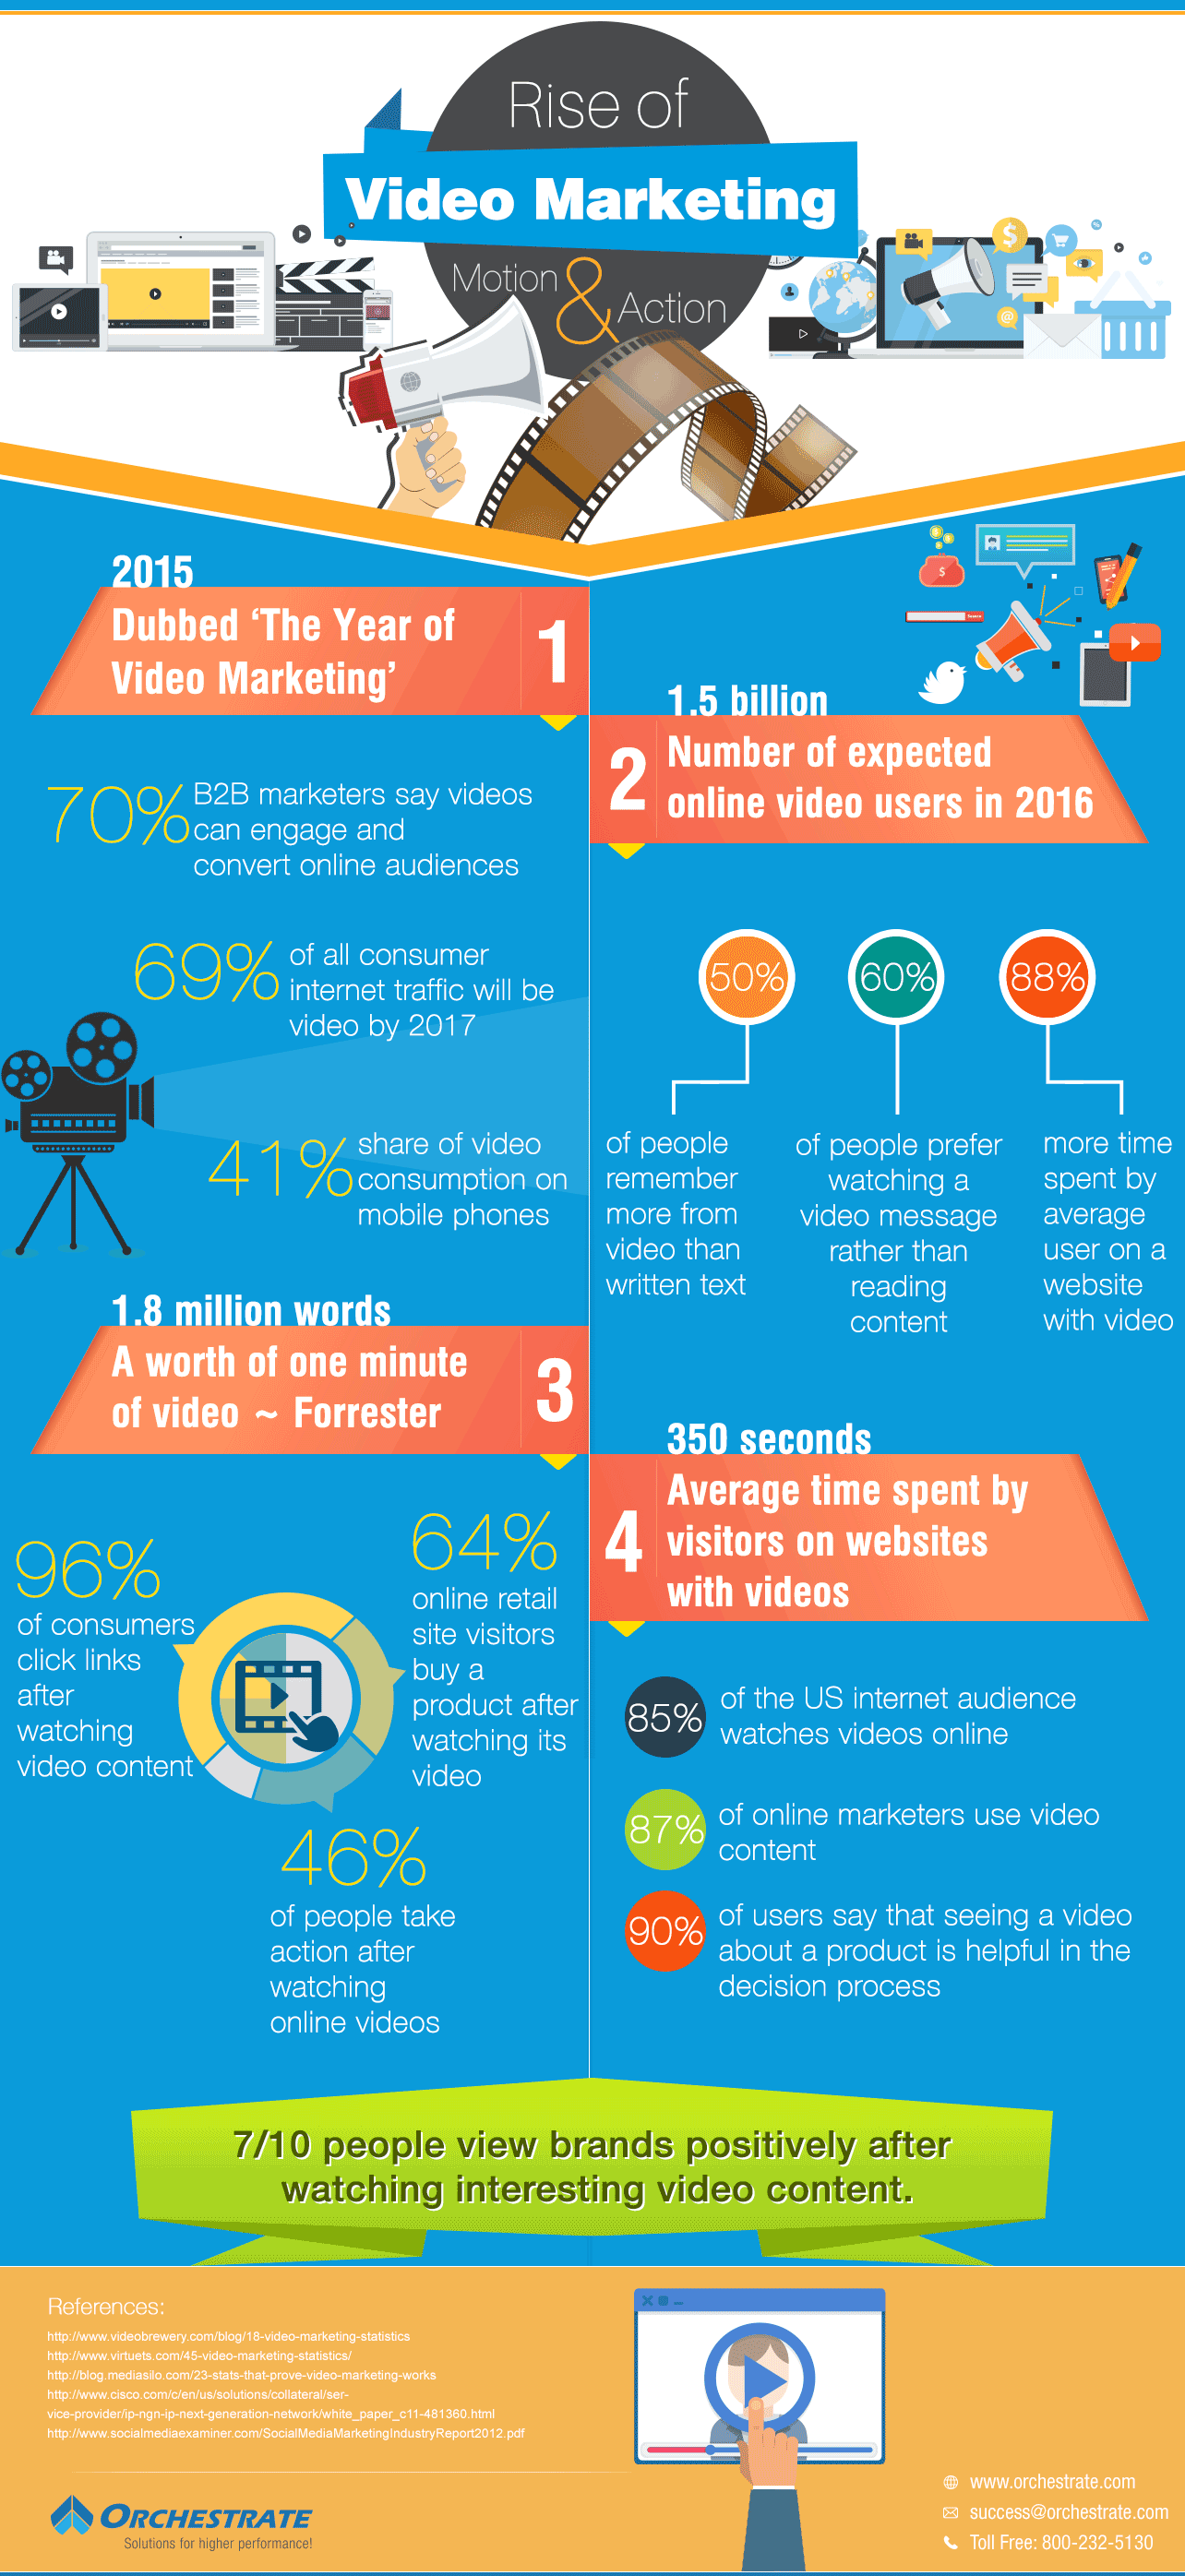 Rise of Video Marketing Motion & Action Infographic